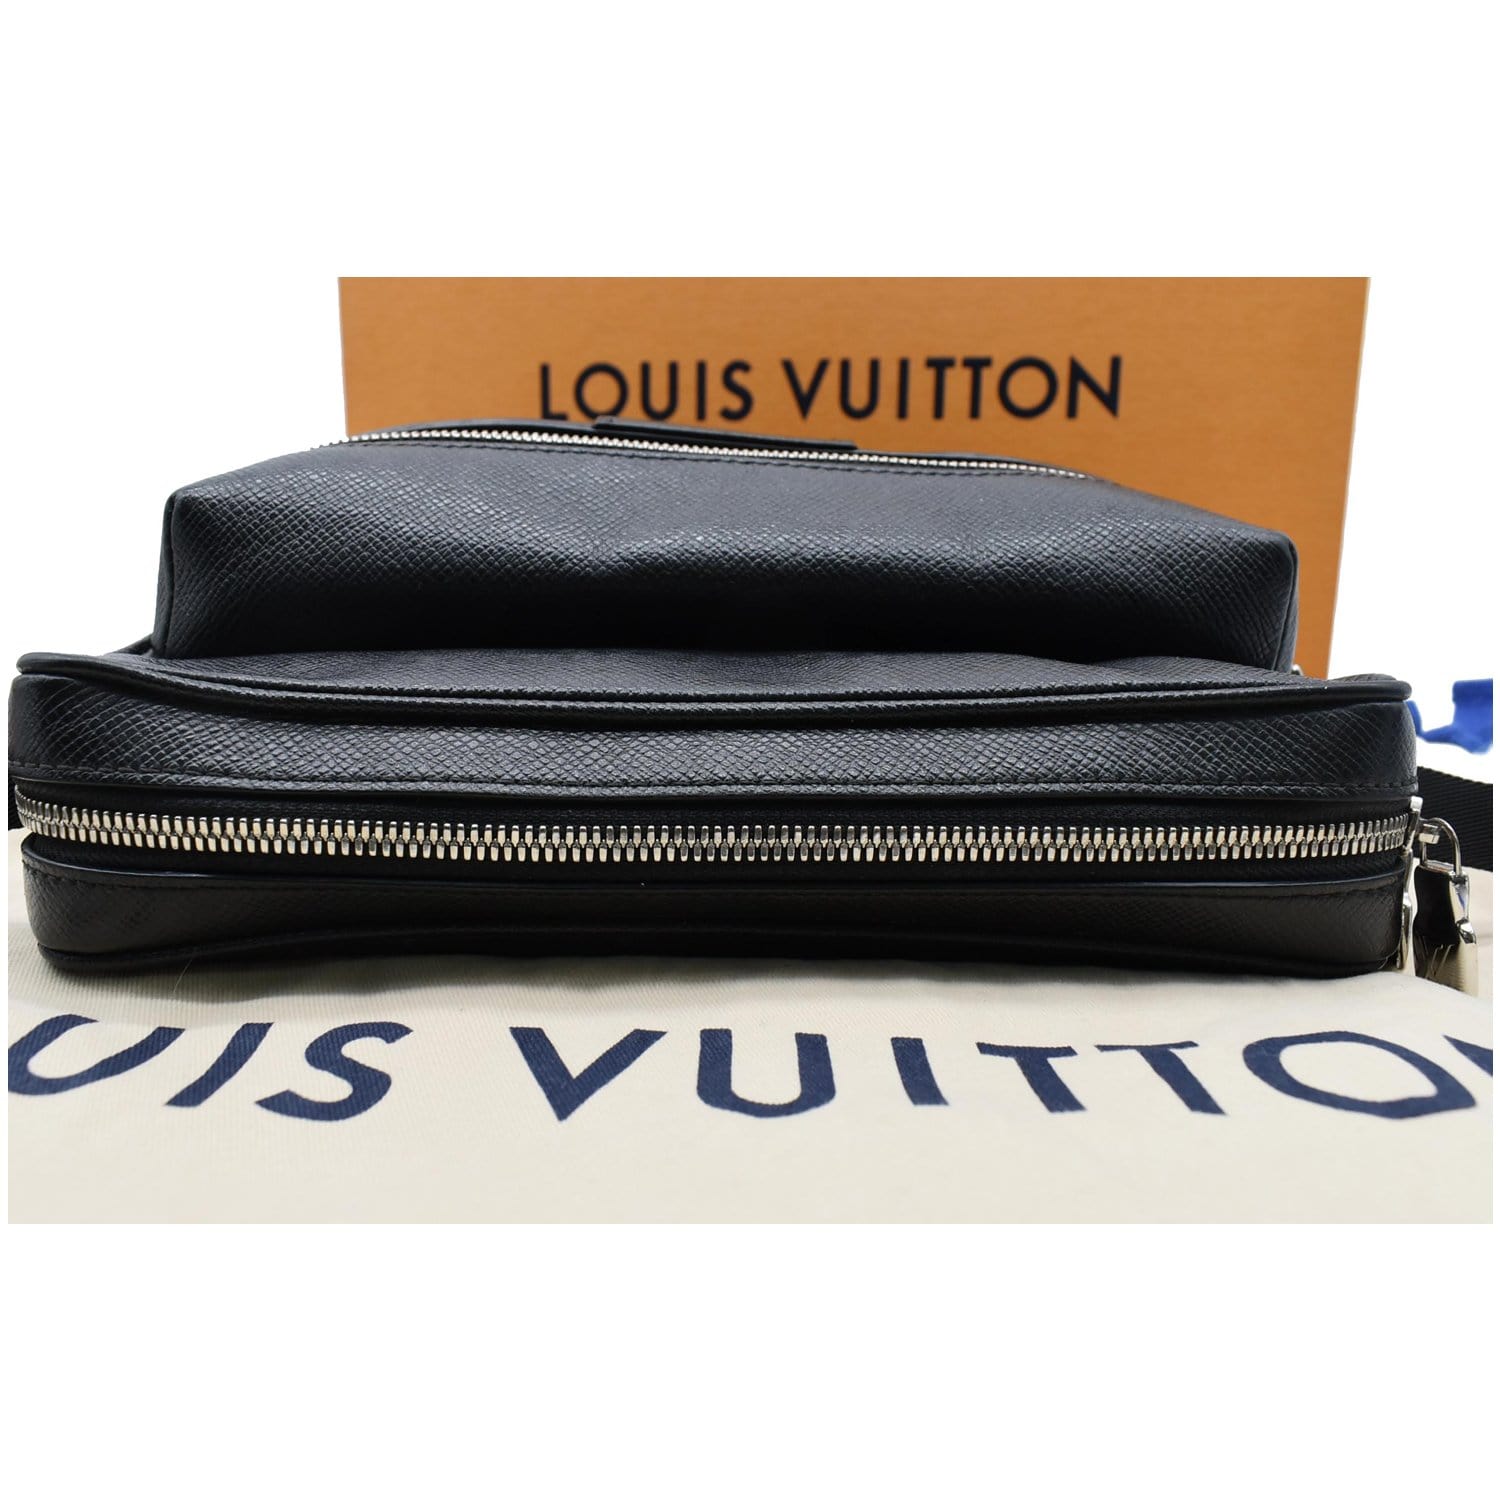 Louis Satchel bag - Charcoal black / Waxed Leather